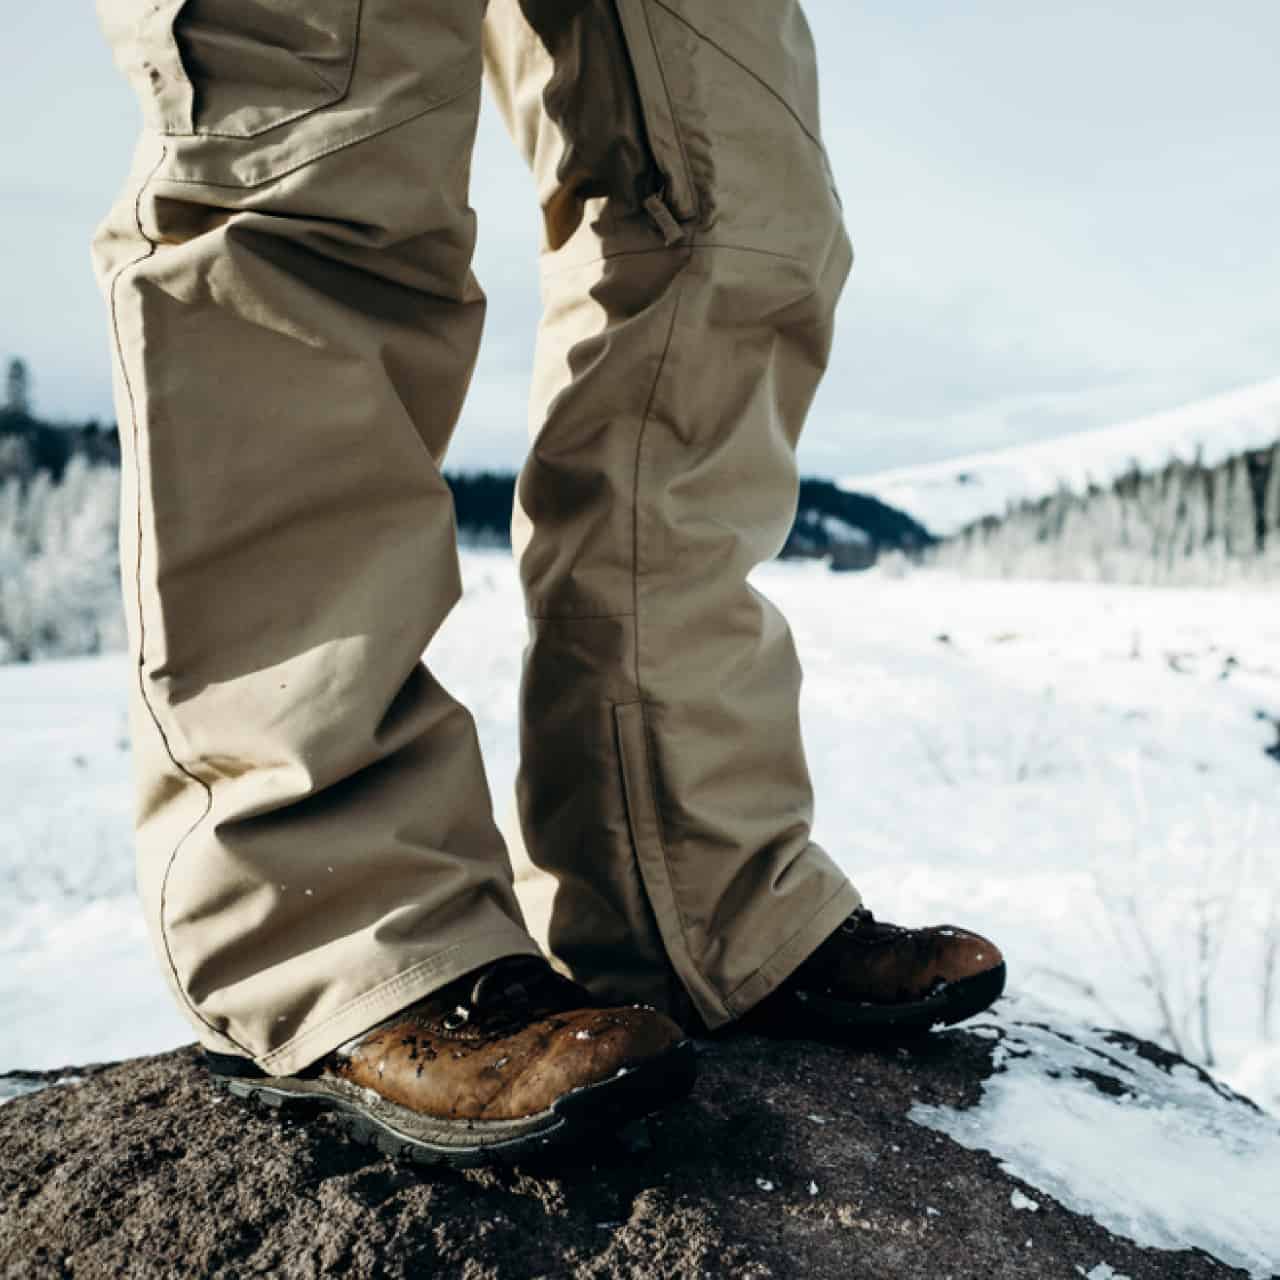 Why Are Hiking Pants So Baggy And So Expensive? - Craft of Manhood